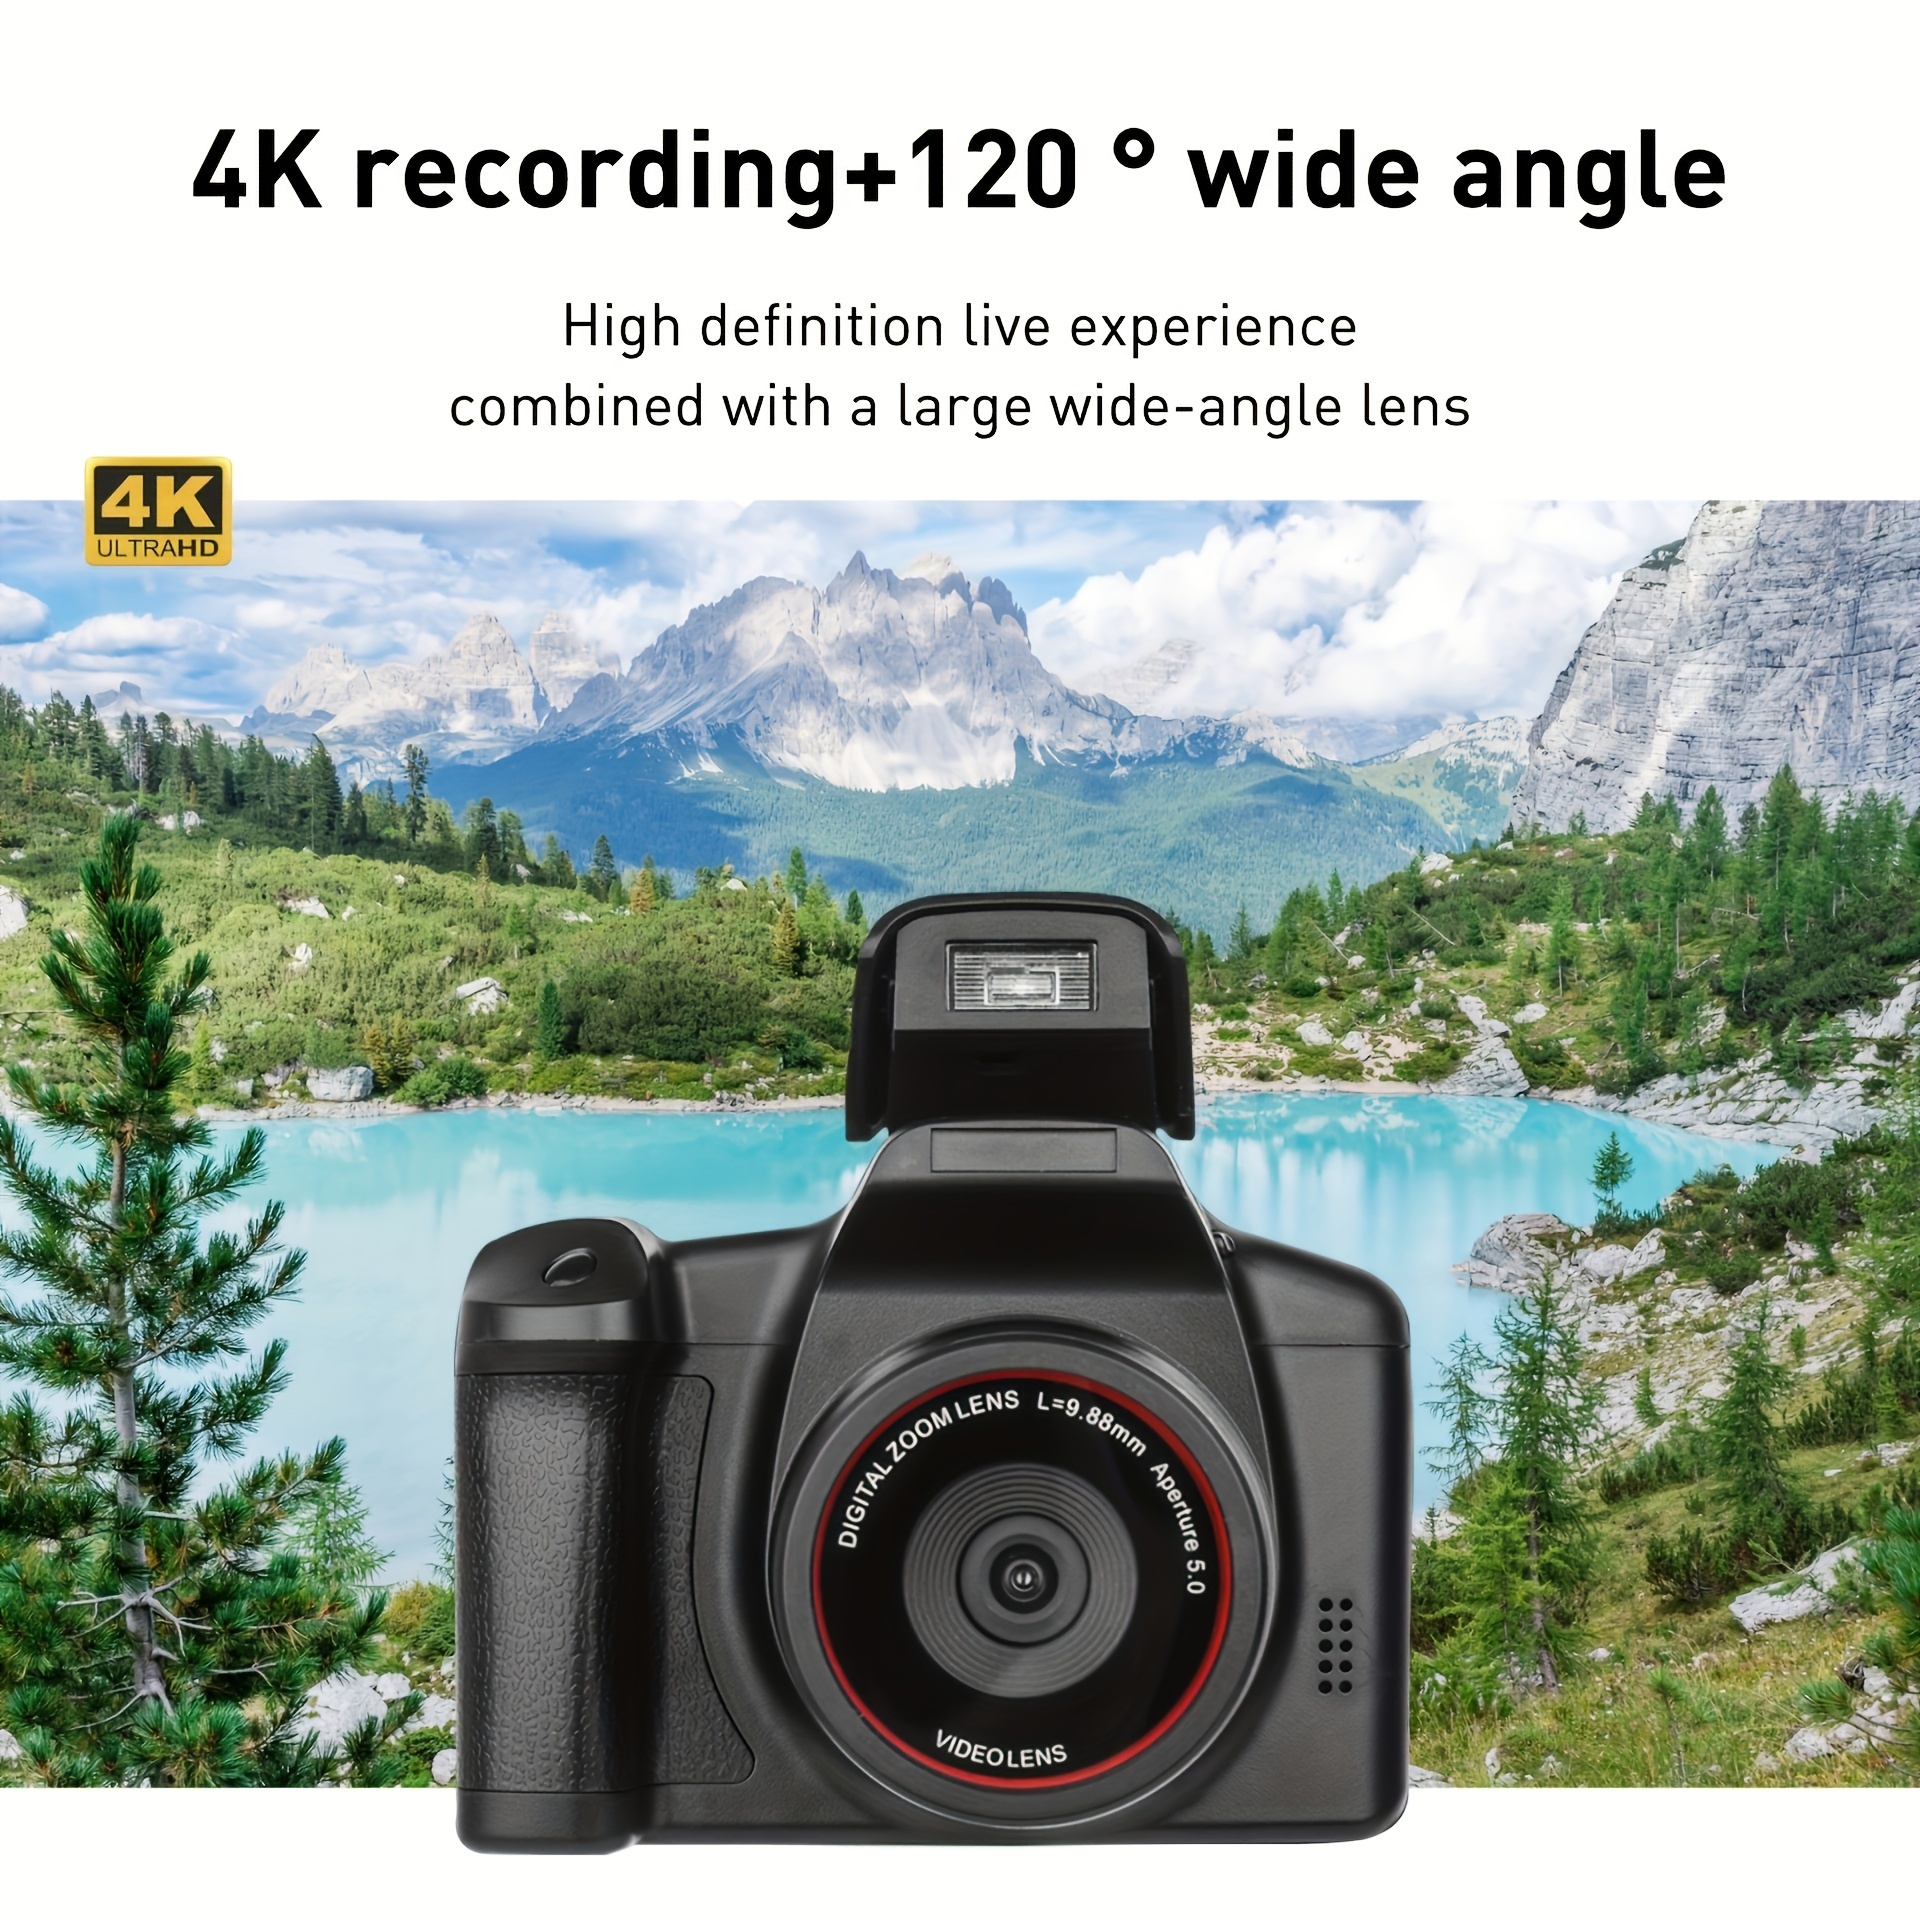 

Hd Digital Camera Can Take Photos And Videos 2.4 Inch Screen Display 16x Digital Zoom Slr Camera Christmas New Year Gift Battery Not Included, 4 Aa Batteries Required